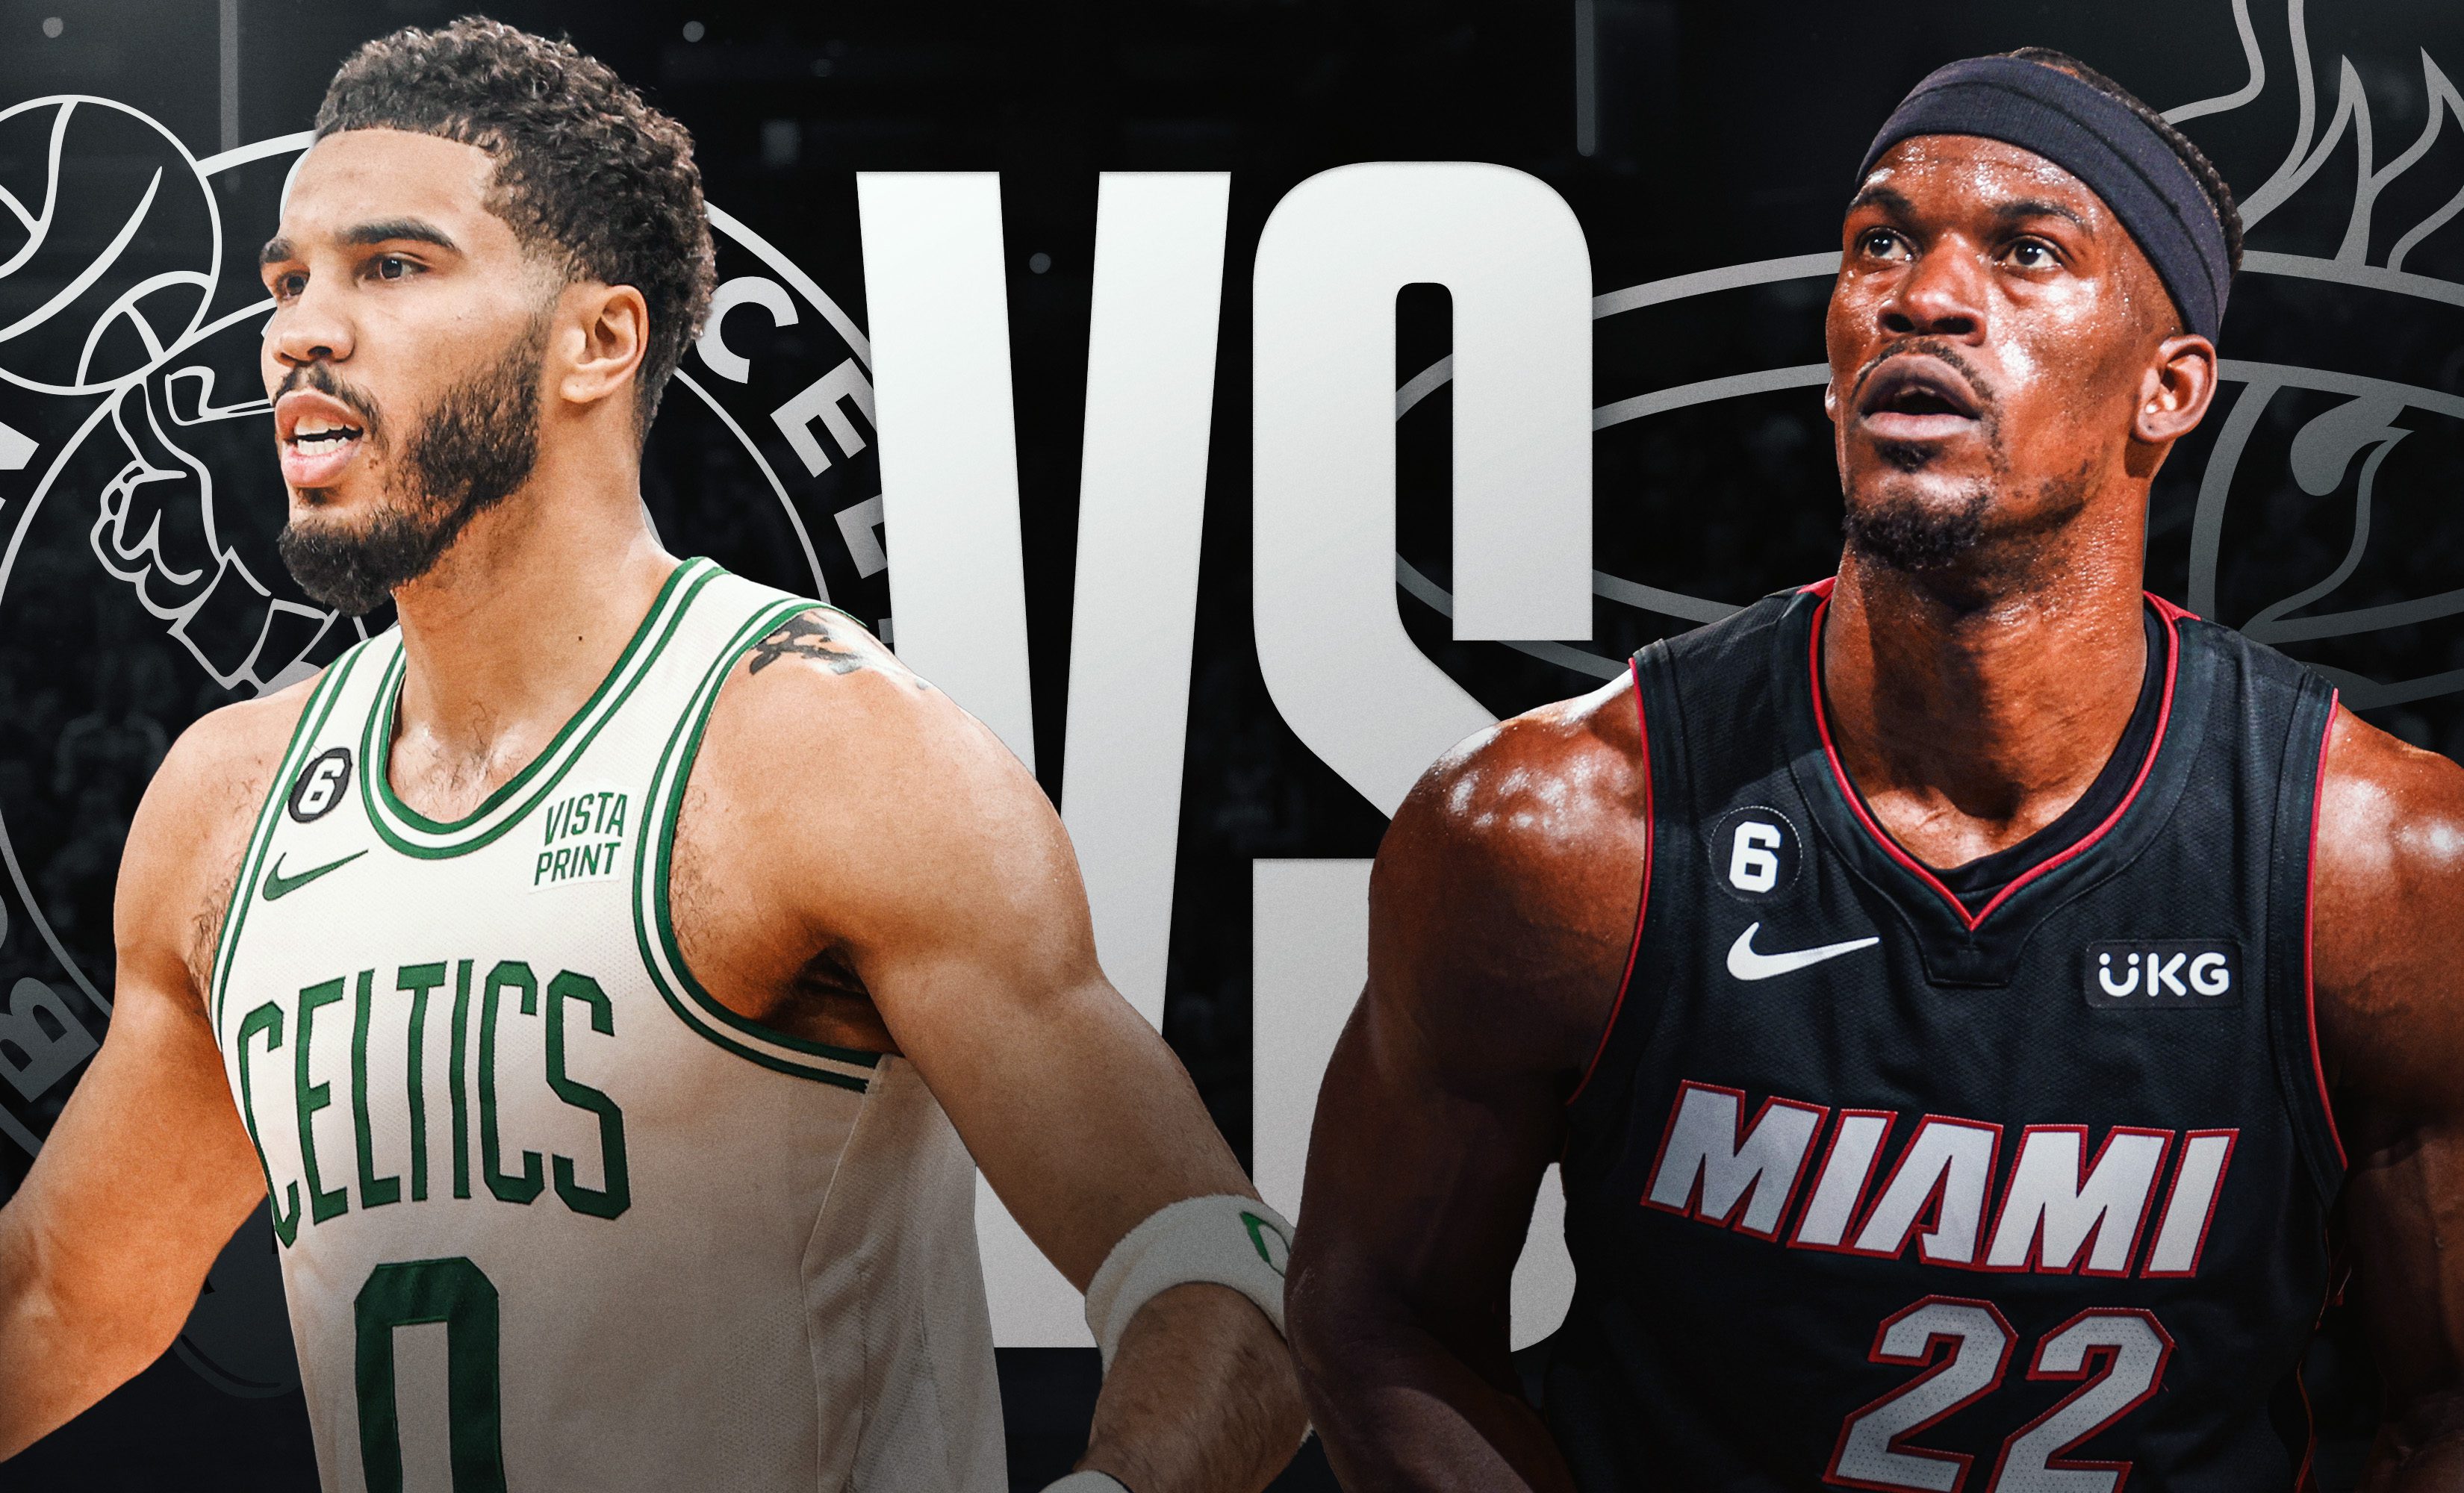 Heat Lead 2-0: Heat vs. Celtics Game 3 Playoff Preview, Odds & Predictions